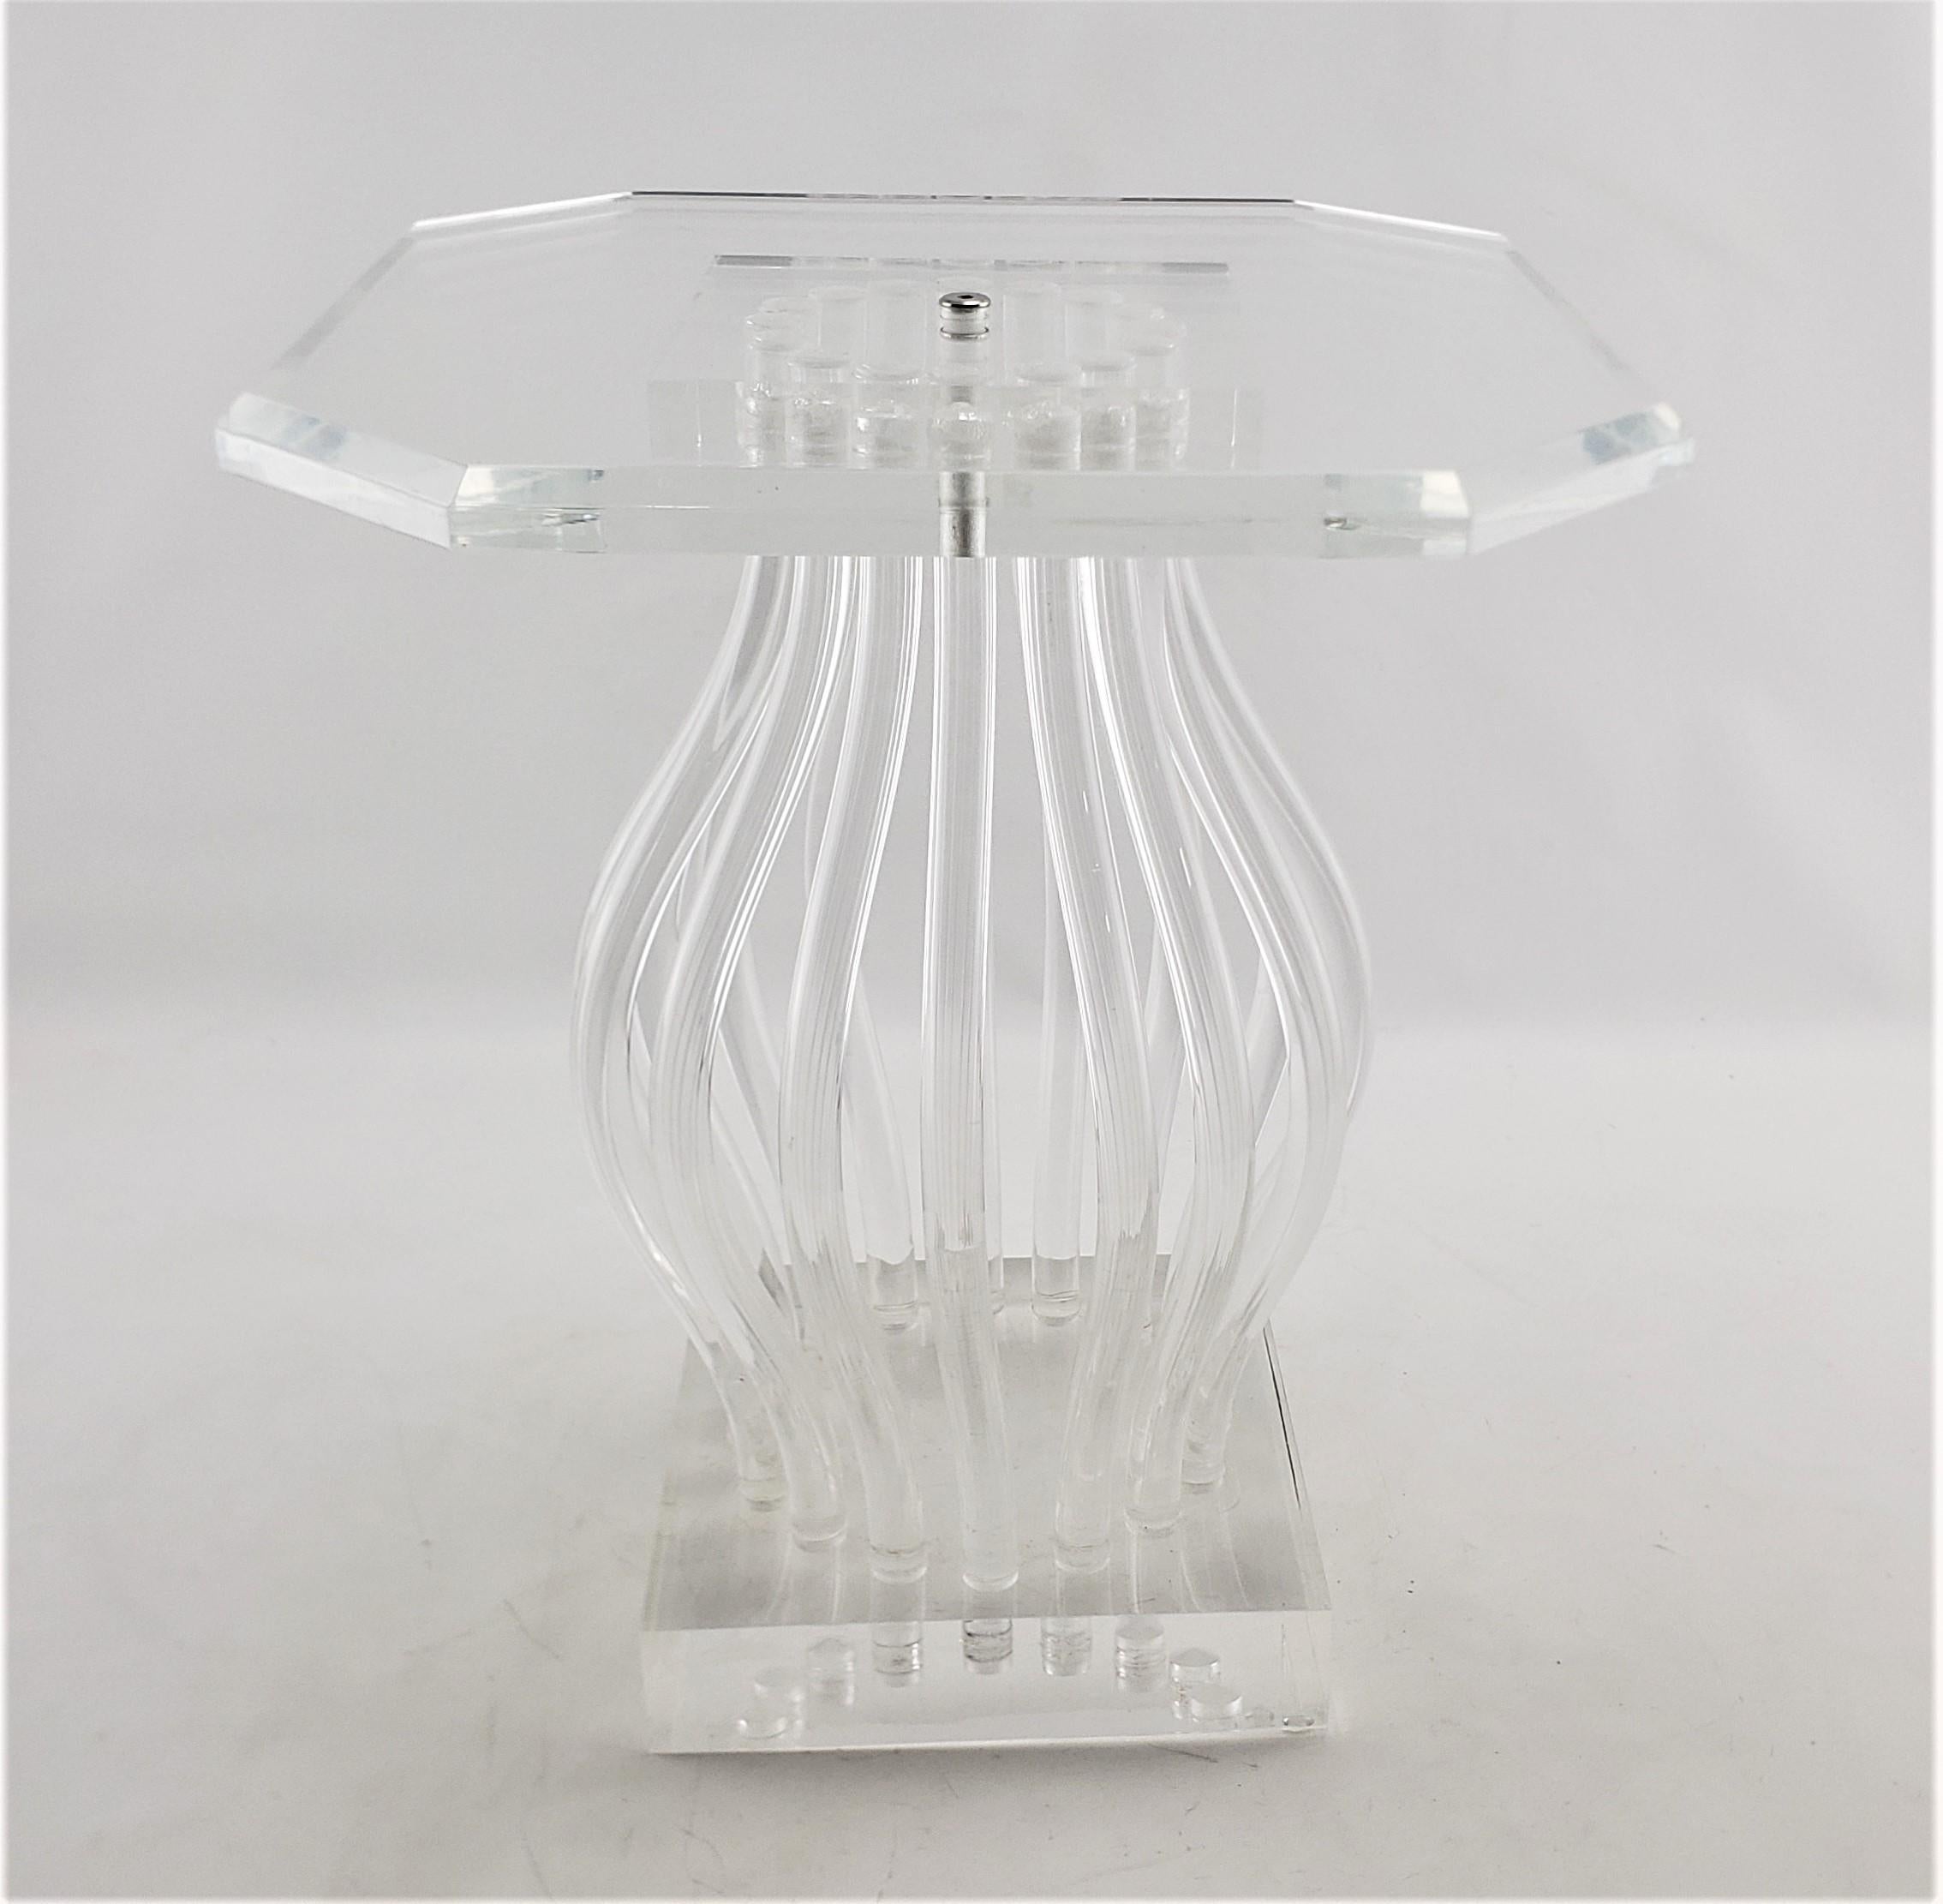 This clear lucite or acrylic and chrome 'Ghost' side table or pedestal is unsigned, but presumed to have originated from Italy, dating to approximately 1975 and done in a Mid-Century Modern style. The top is done with a clear beveled octagonal slab